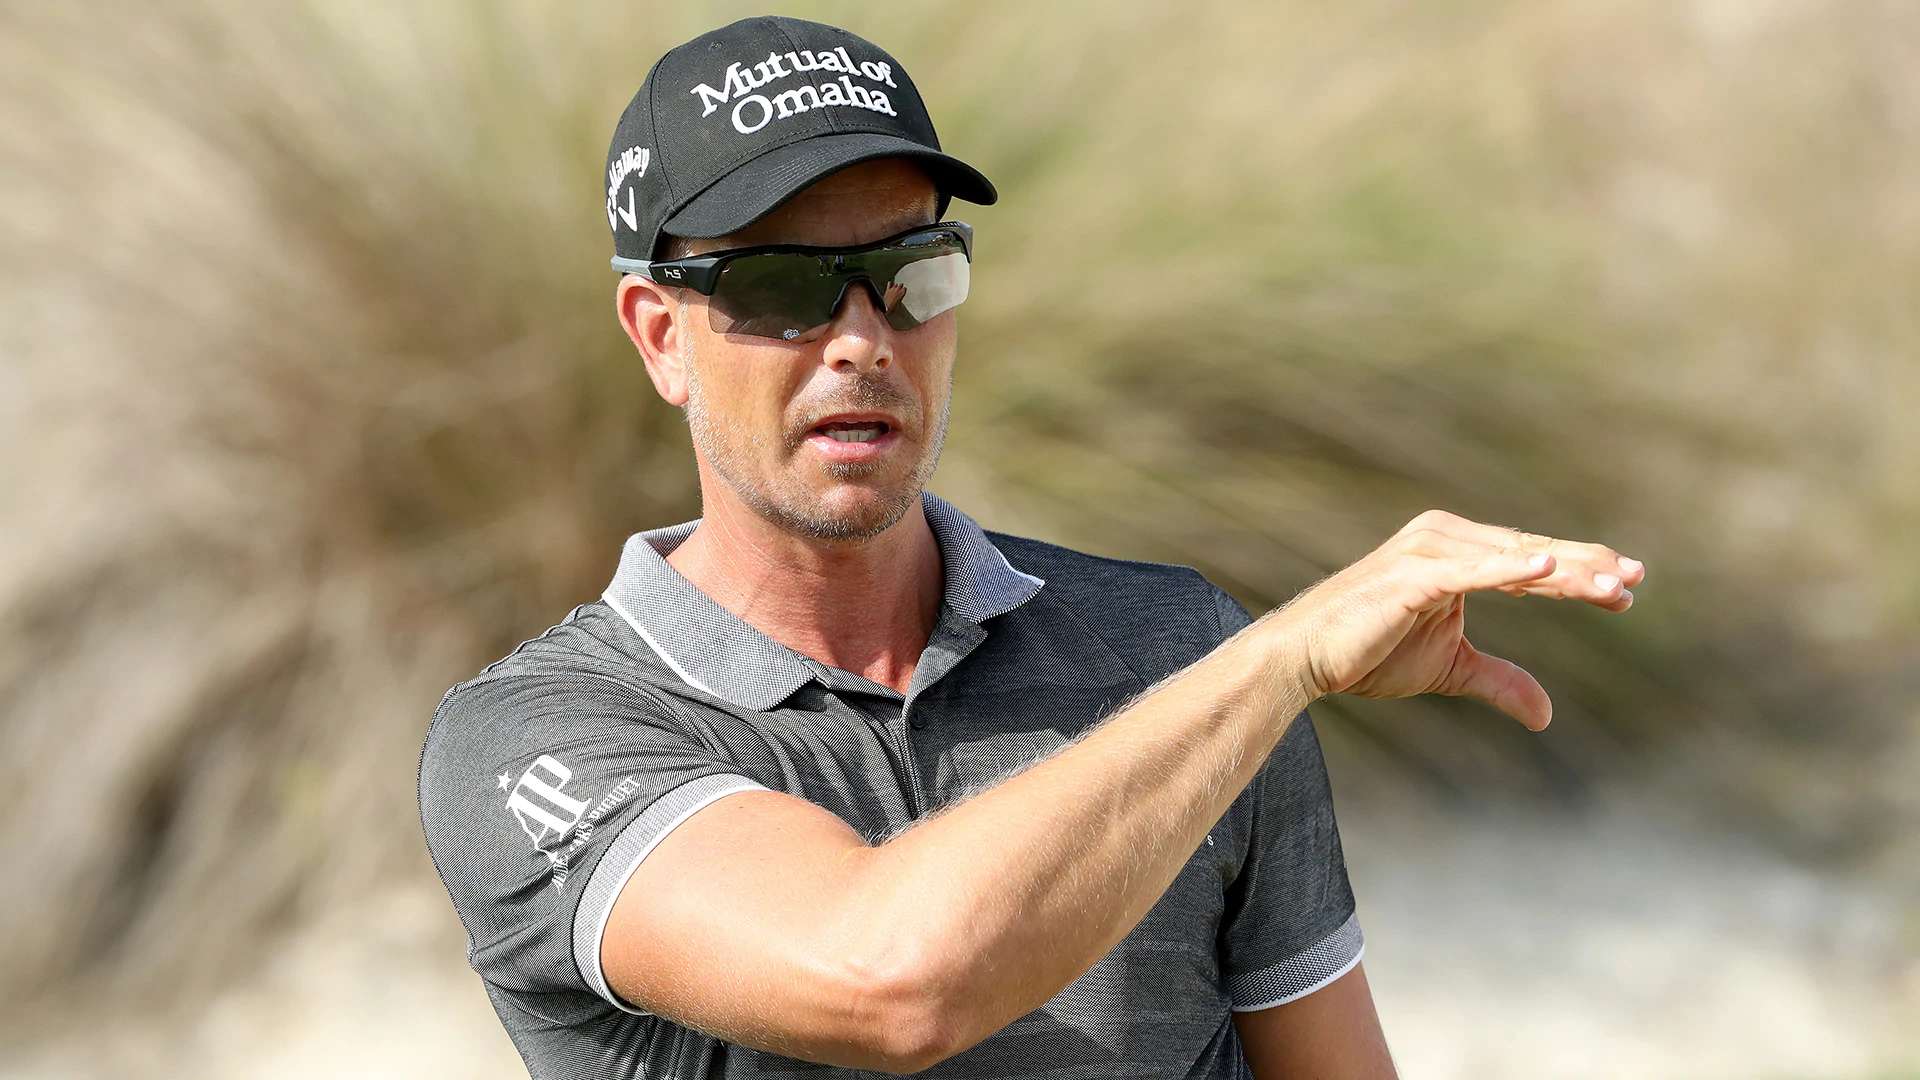 Schedule changes will be a challenge for players like Stenson